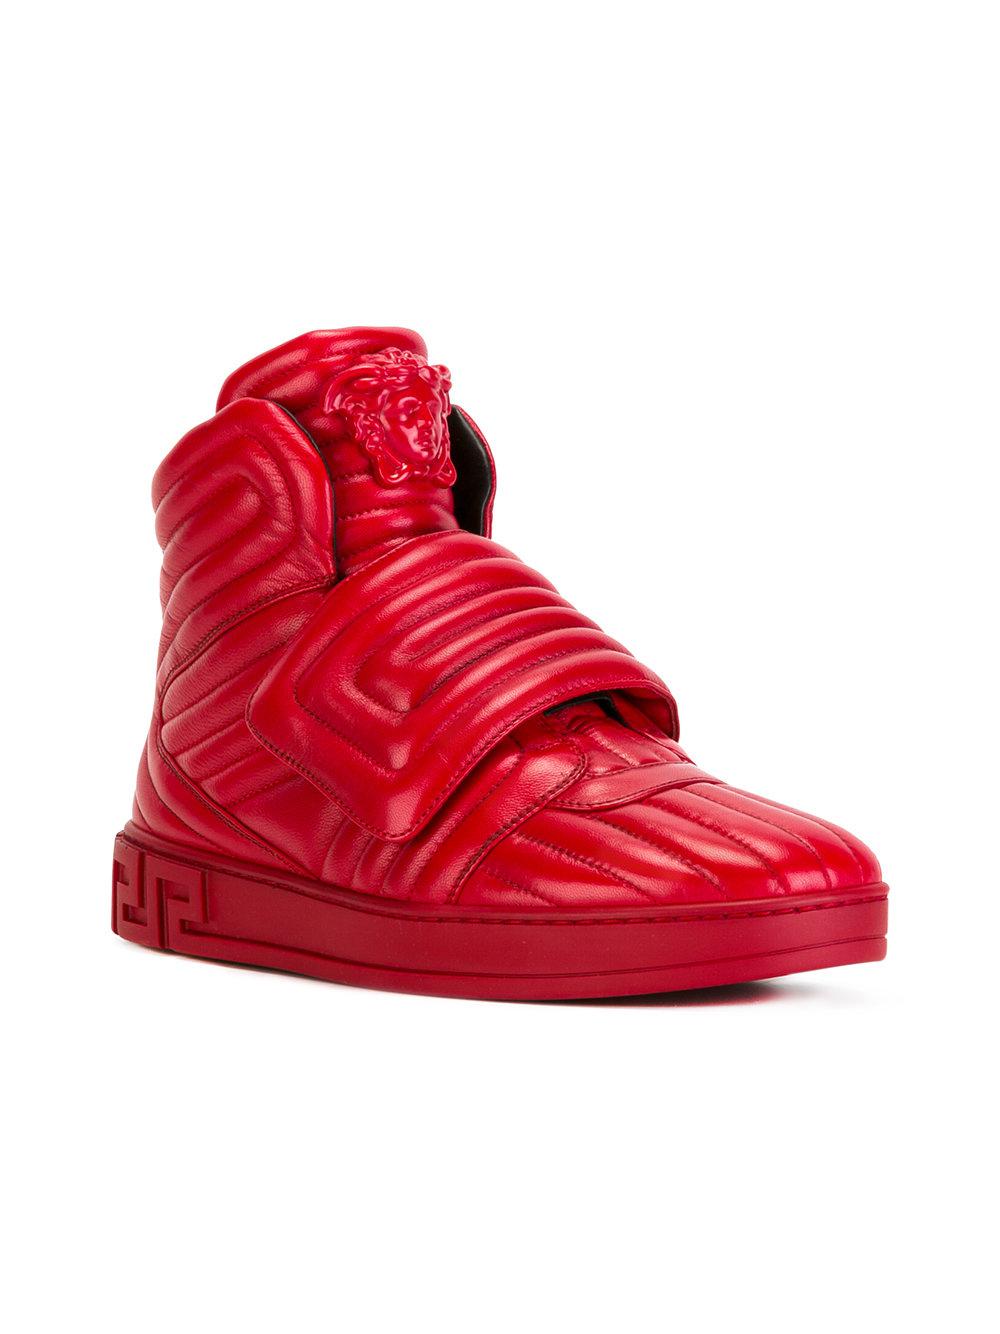 Versace Leather Quilted Medusa Head High-tops in Red | Lyst